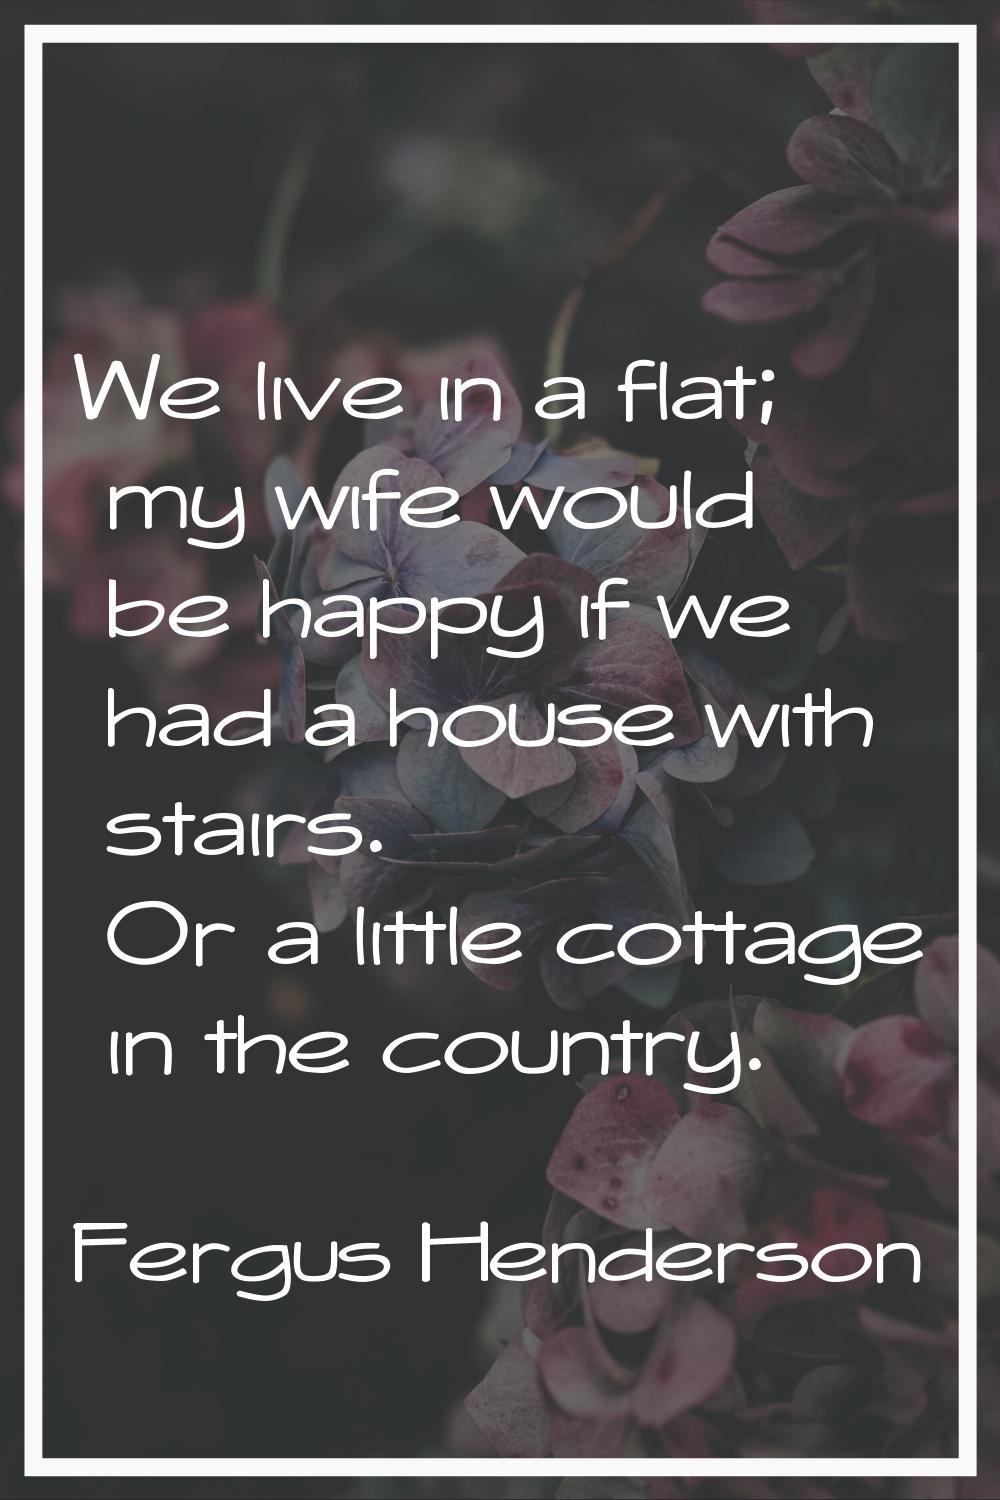 We live in a flat; my wife would be happy if we had a house with stairs. Or a little cottage in the